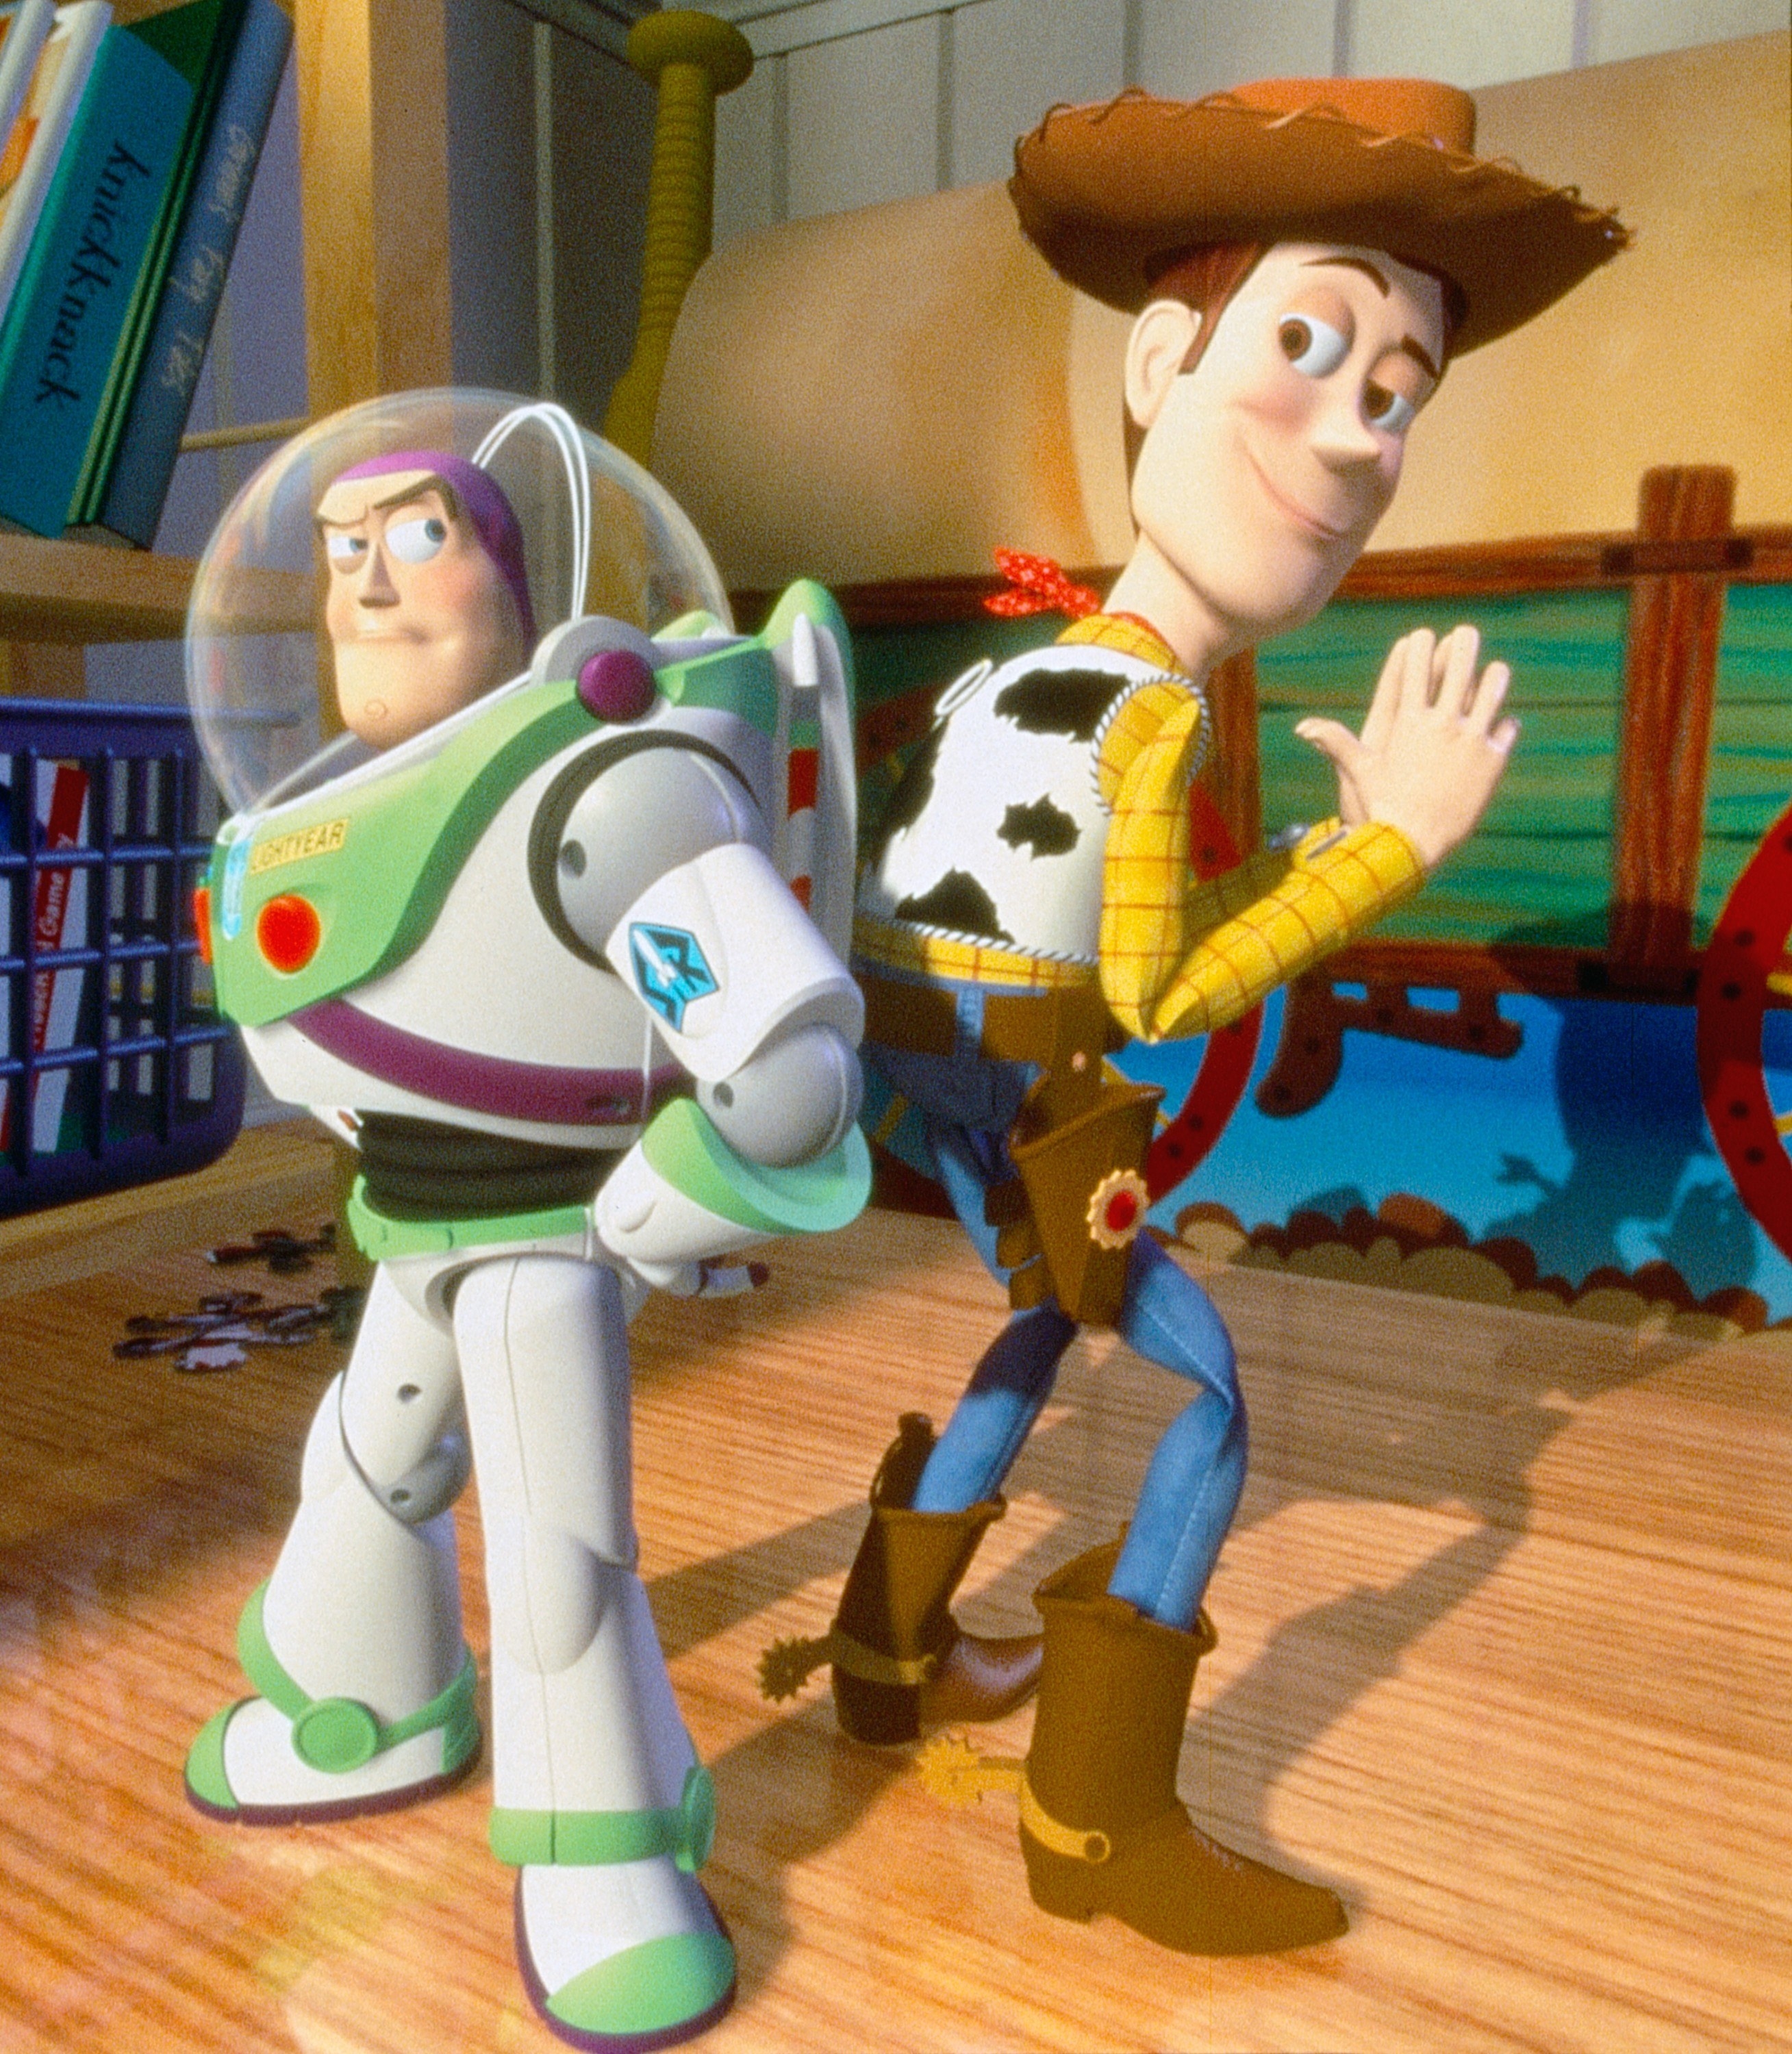 Still from &quot;Toy Story&quot; featuring Buzz Lightyear and Woody, they&#x27;re looking at each other with their backs to each other